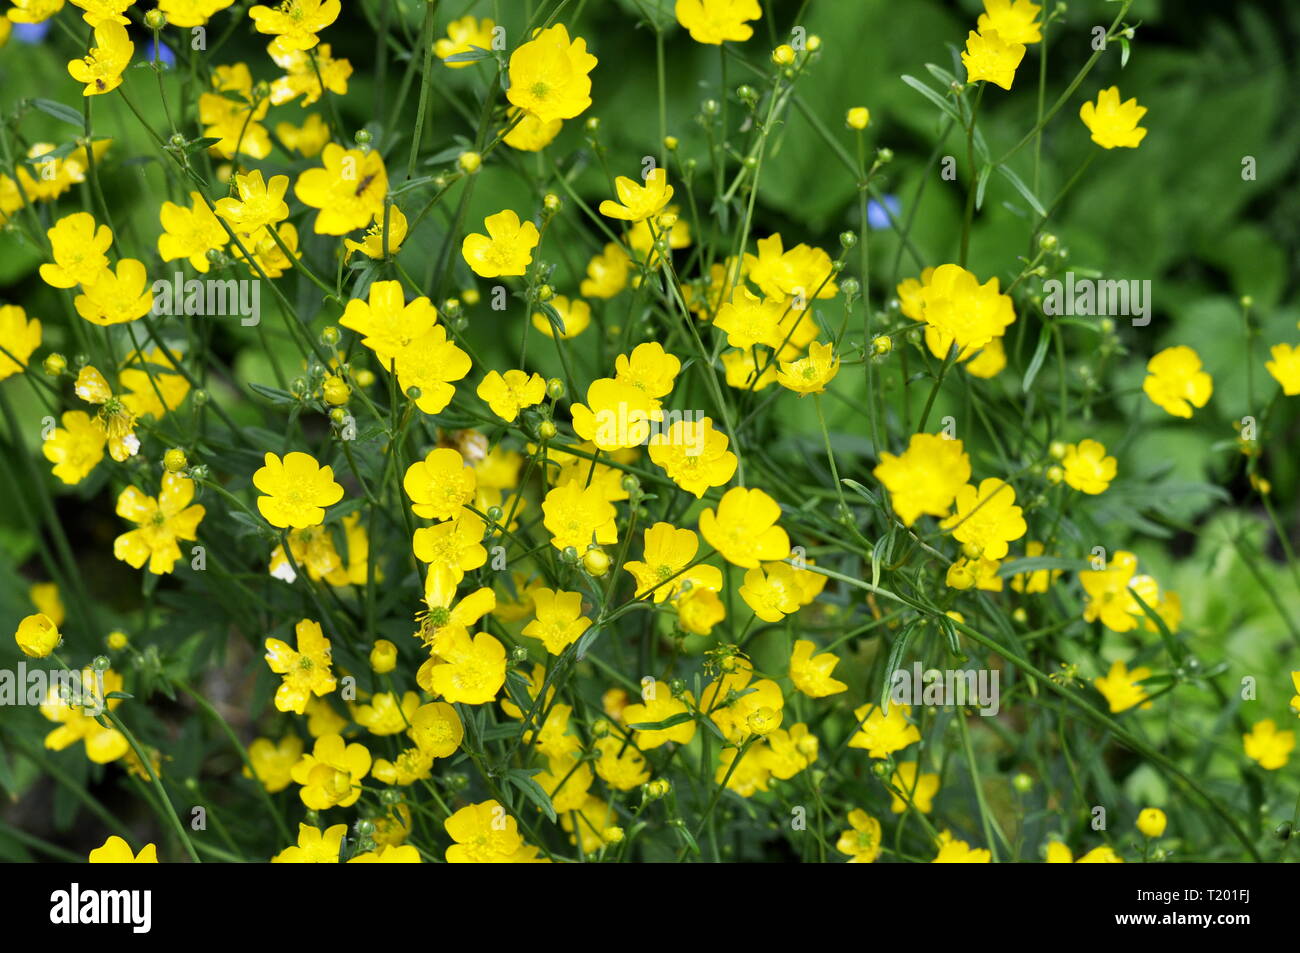 Common buttercup plant Ranunculus acris flowering in summer Stock Photo